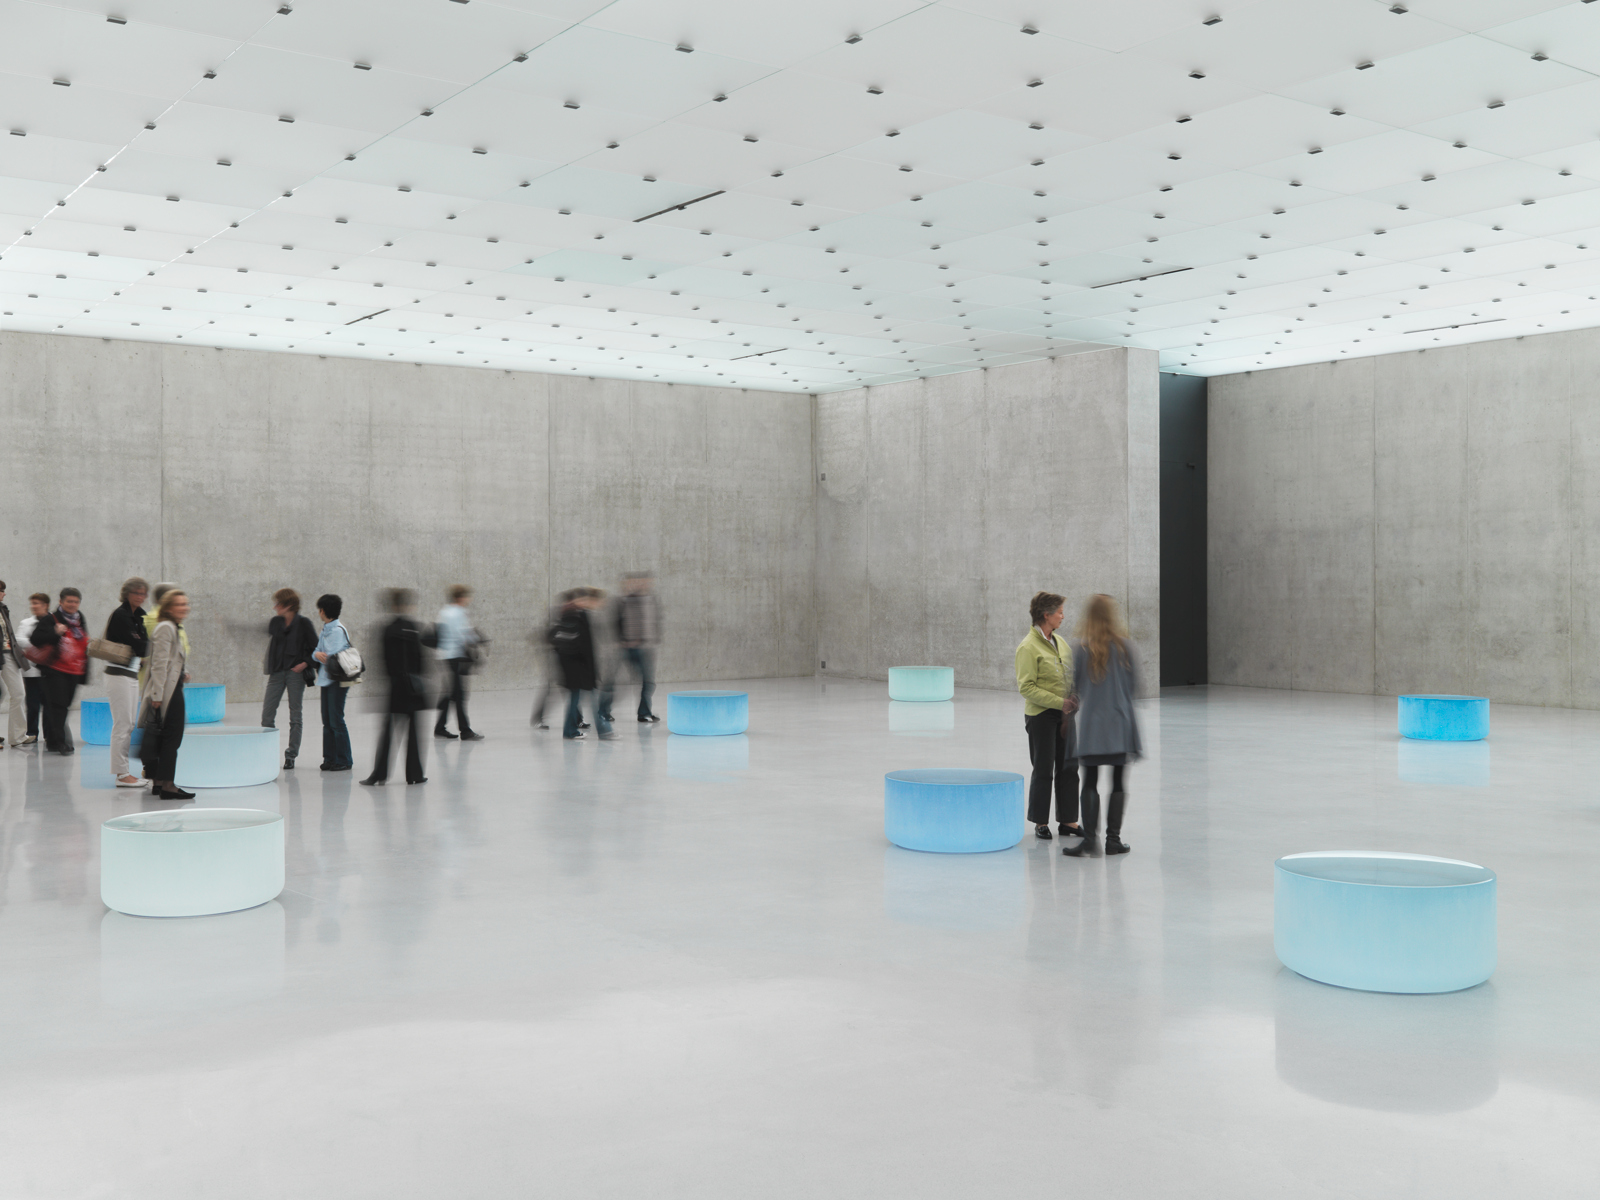 Roni Horn / Well and Truly, installation view, "Well and Truly", Kunsthaus Bregenz, 2010 / 2010